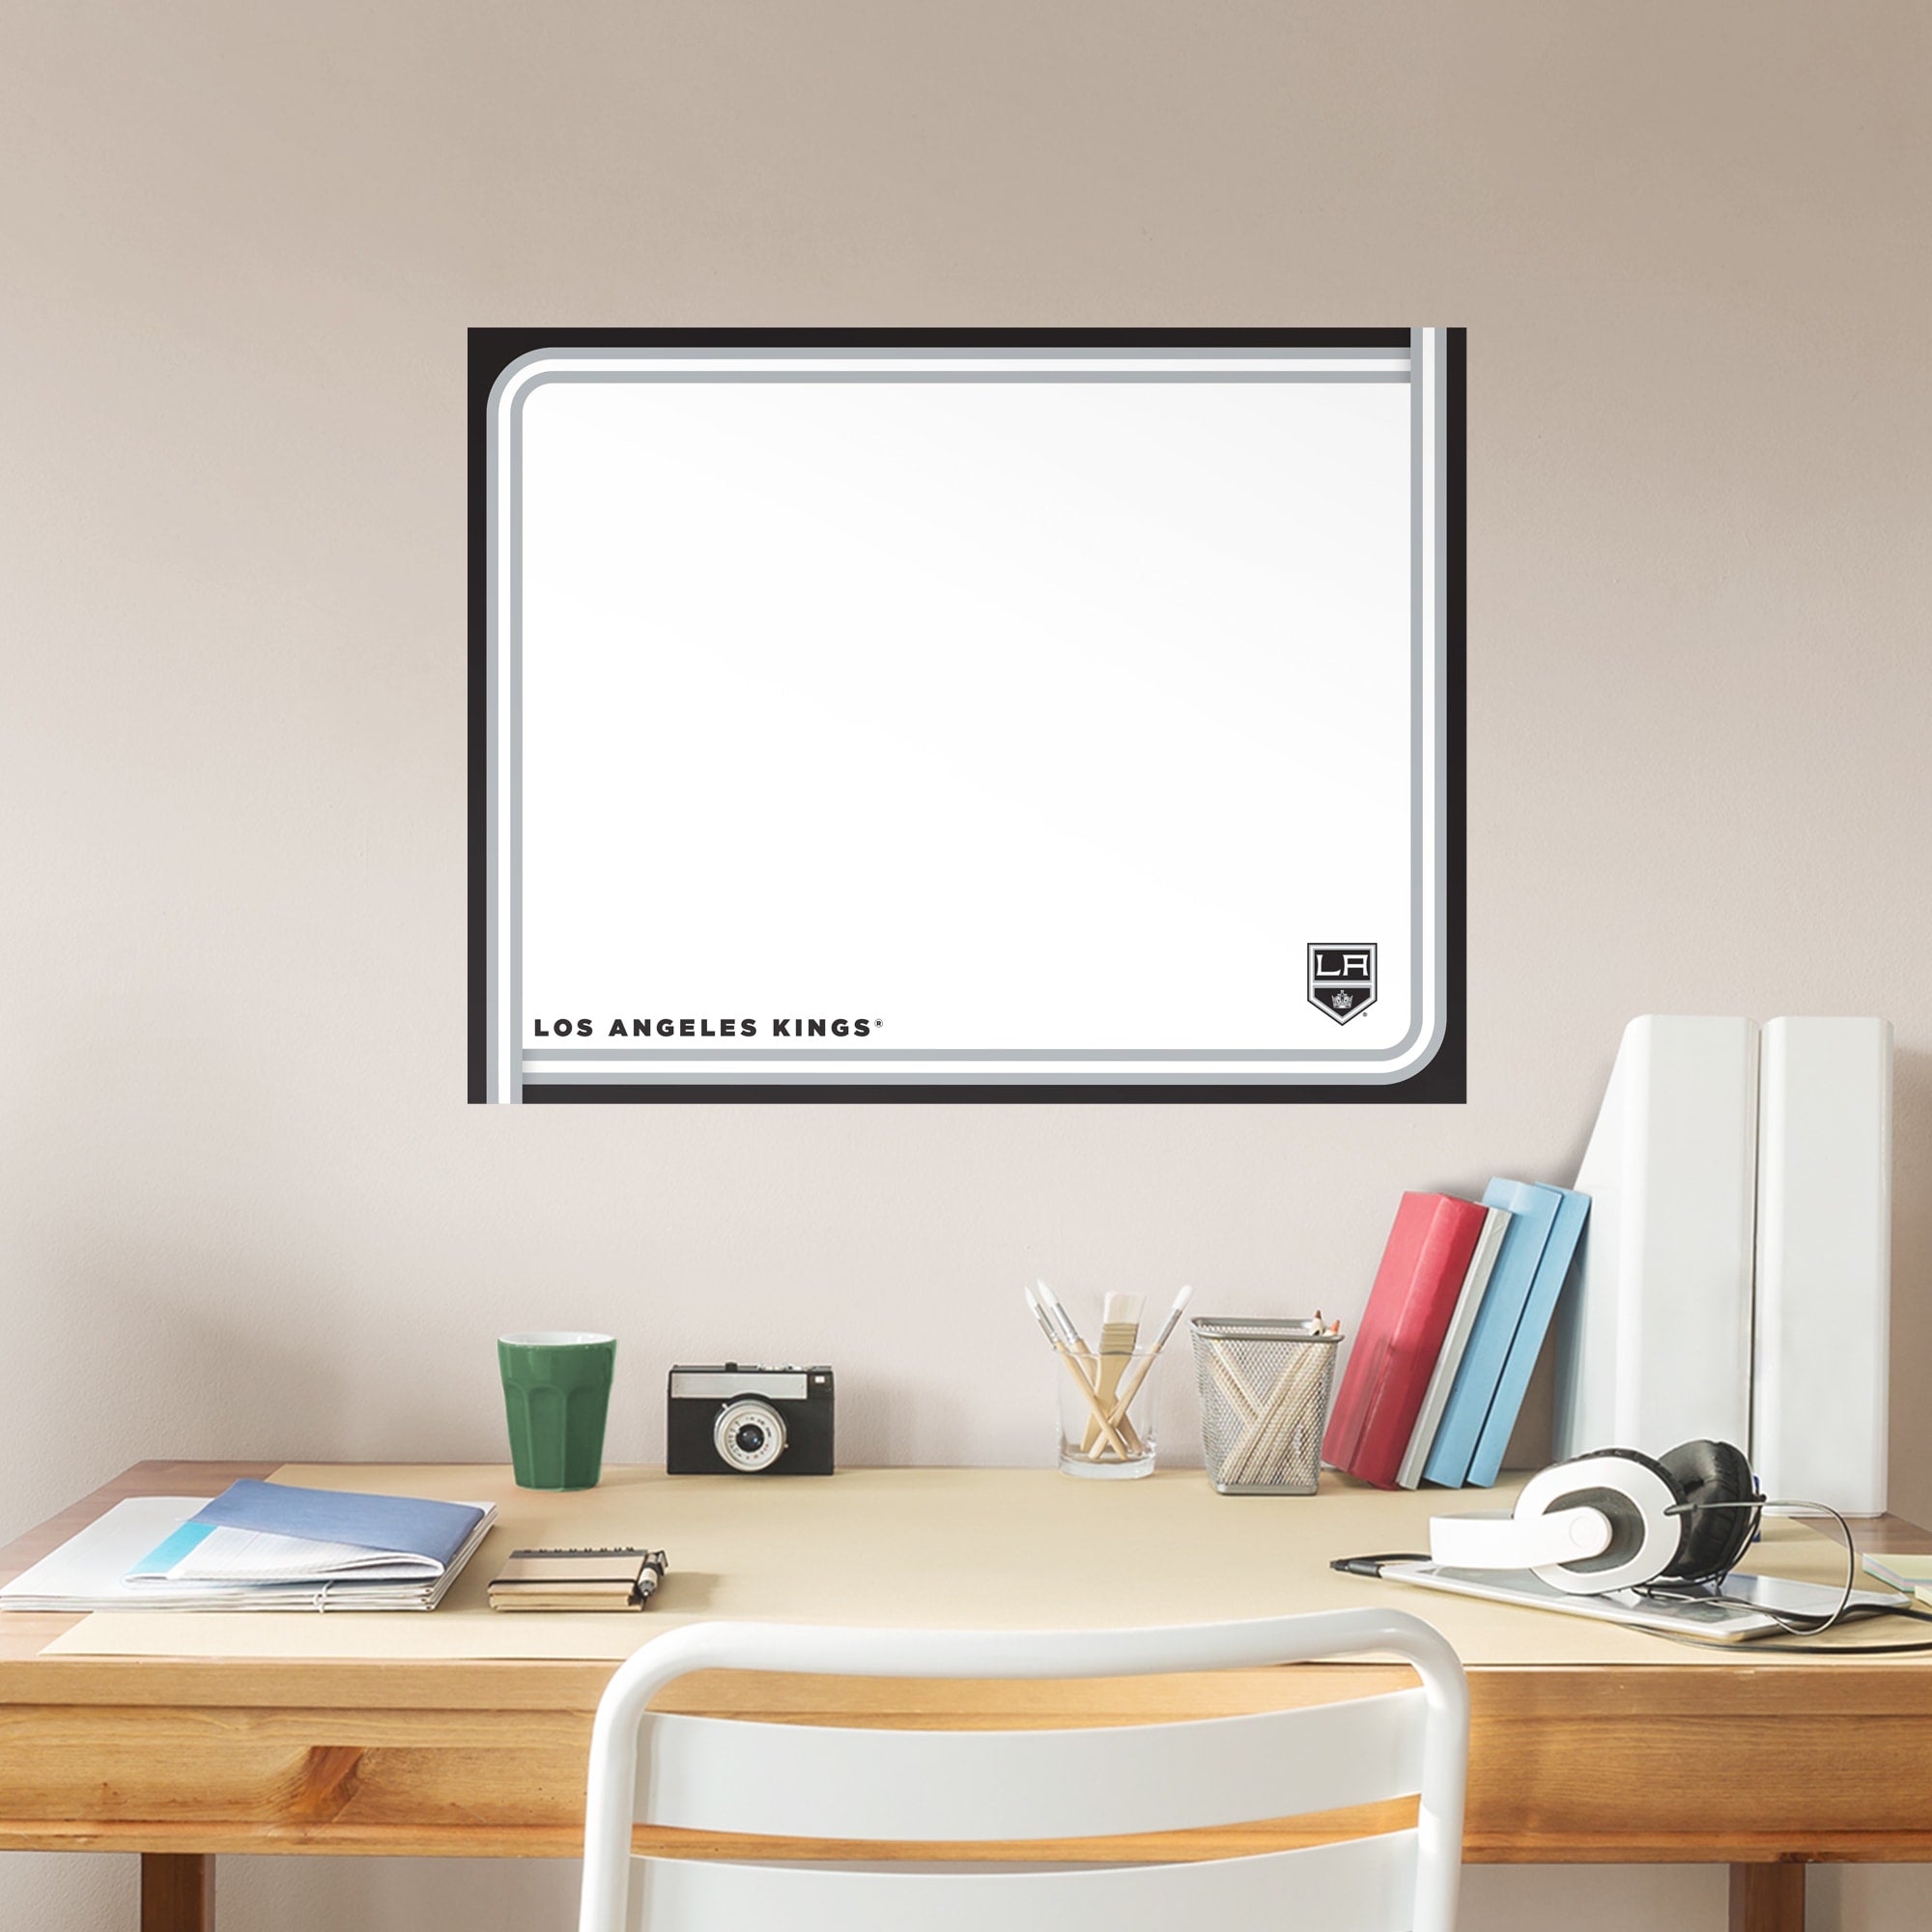 Los Angeles Kings: Dry Erase Whiteboard - X-Large Officially Licensed NHL Removable Wall Decal XL by Fathead | Vinyl